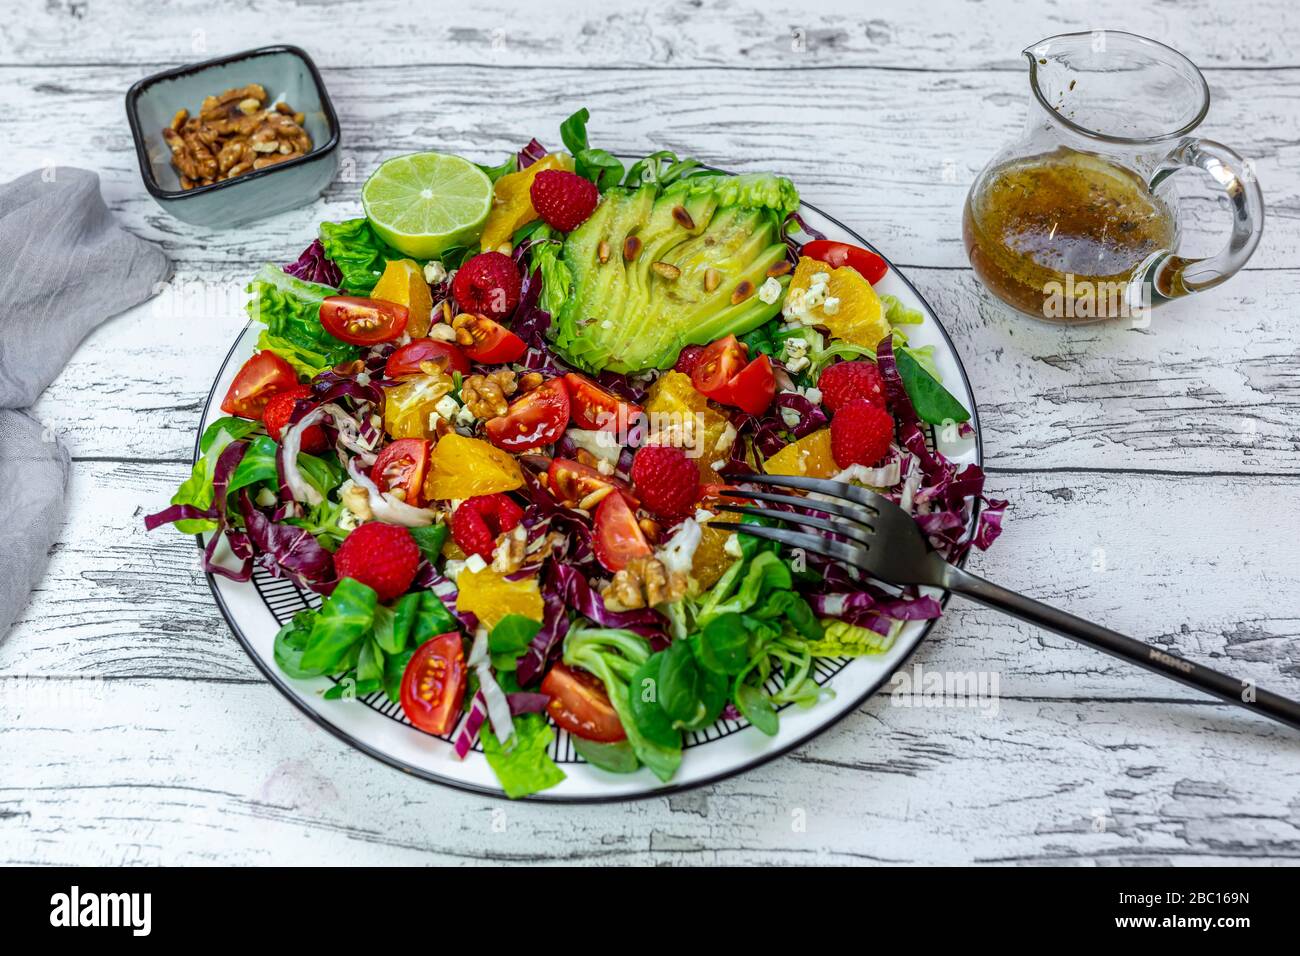 Plate of colorful mixed salad with feta cheese, common beet, walnuts, pine nuts, raspberries, oranges and corn salad Stock Photo